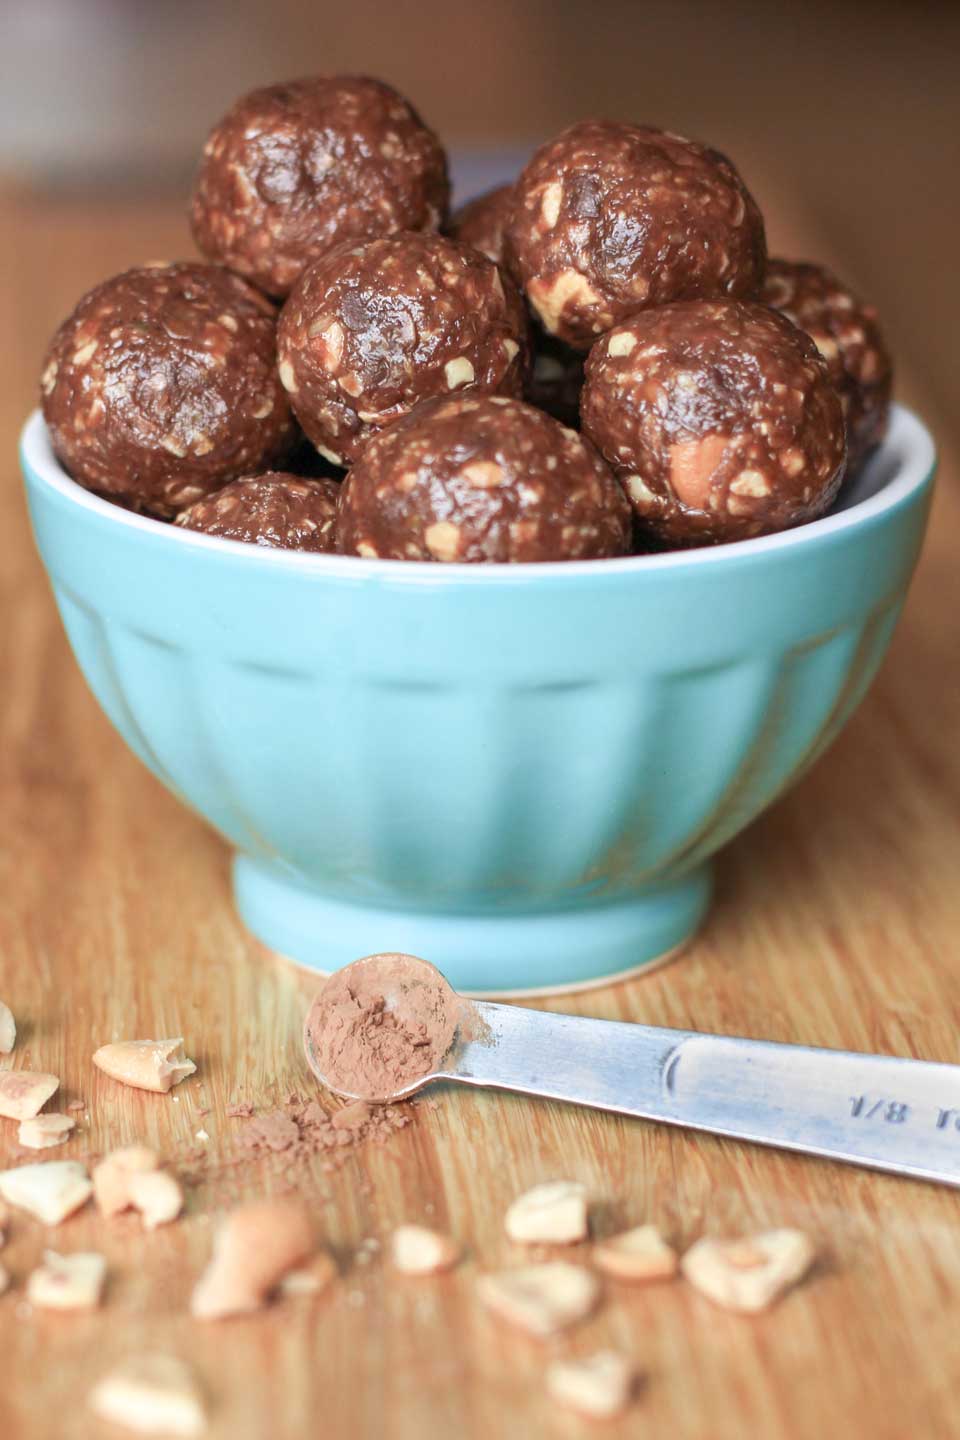 Aqua bowl full of peanut butter energy balls with crushed nuts and measuring spoon of chocolate in the foreground.